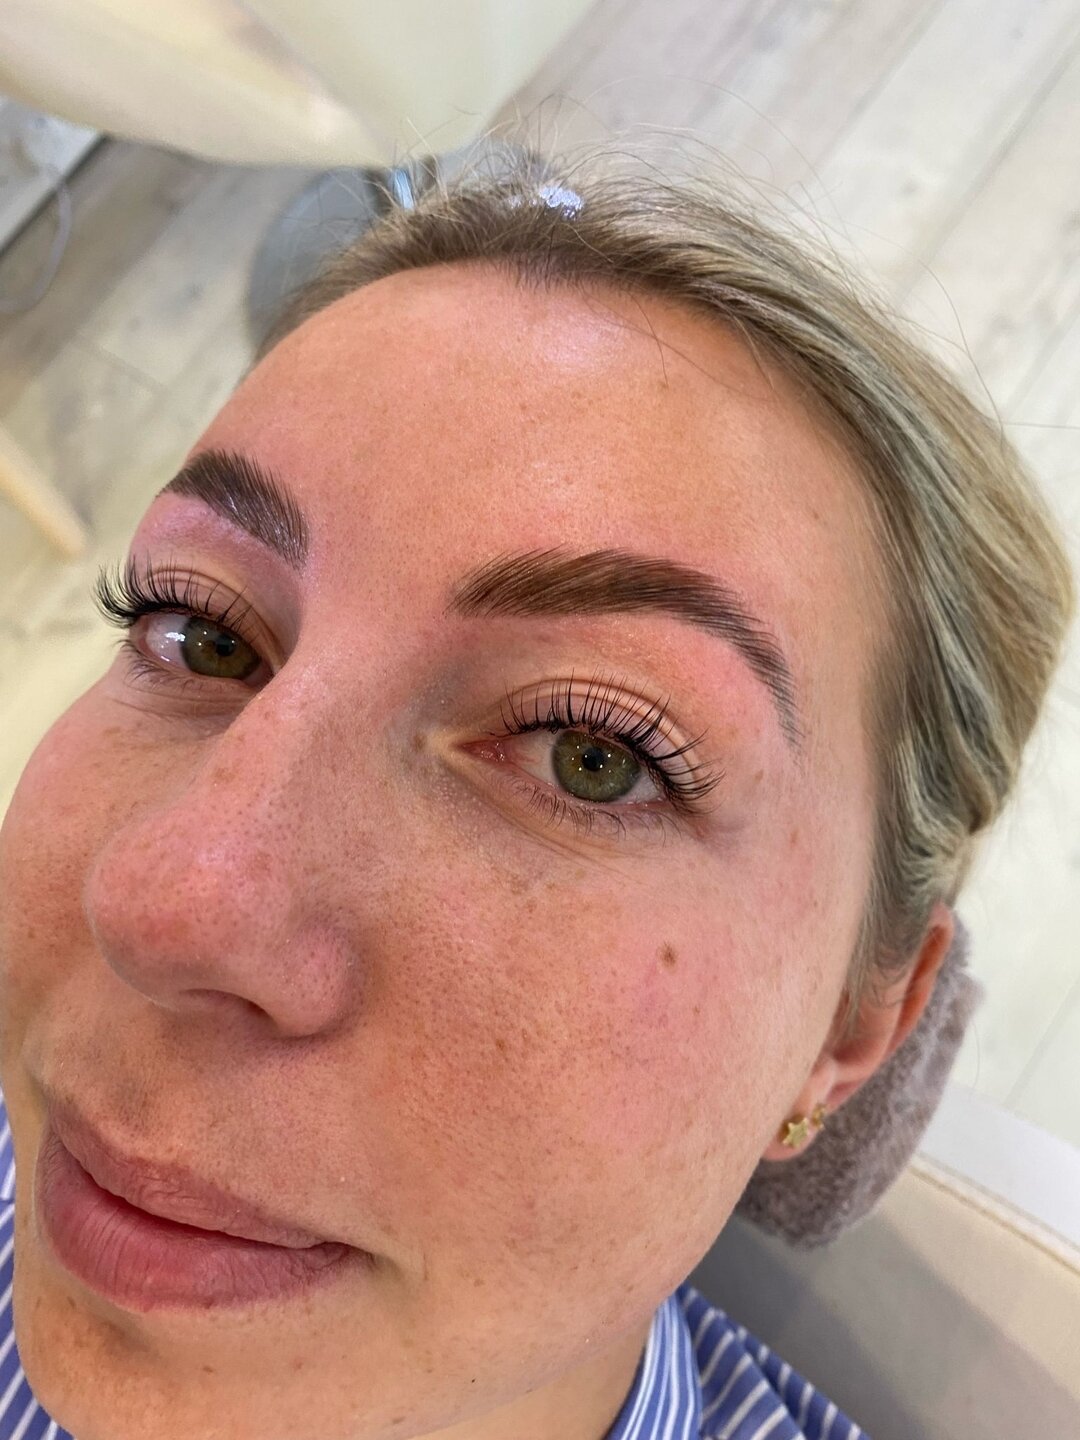 The combo of dreams ☁️ 

This is your sign to head to our bio &amp; book a brow lamination &amp; lash lift 🪄

#browlamination #lashlift #browtransformation #browartist #manchestersalons #stockportsalons #beautyacademy #beautycontentcreator